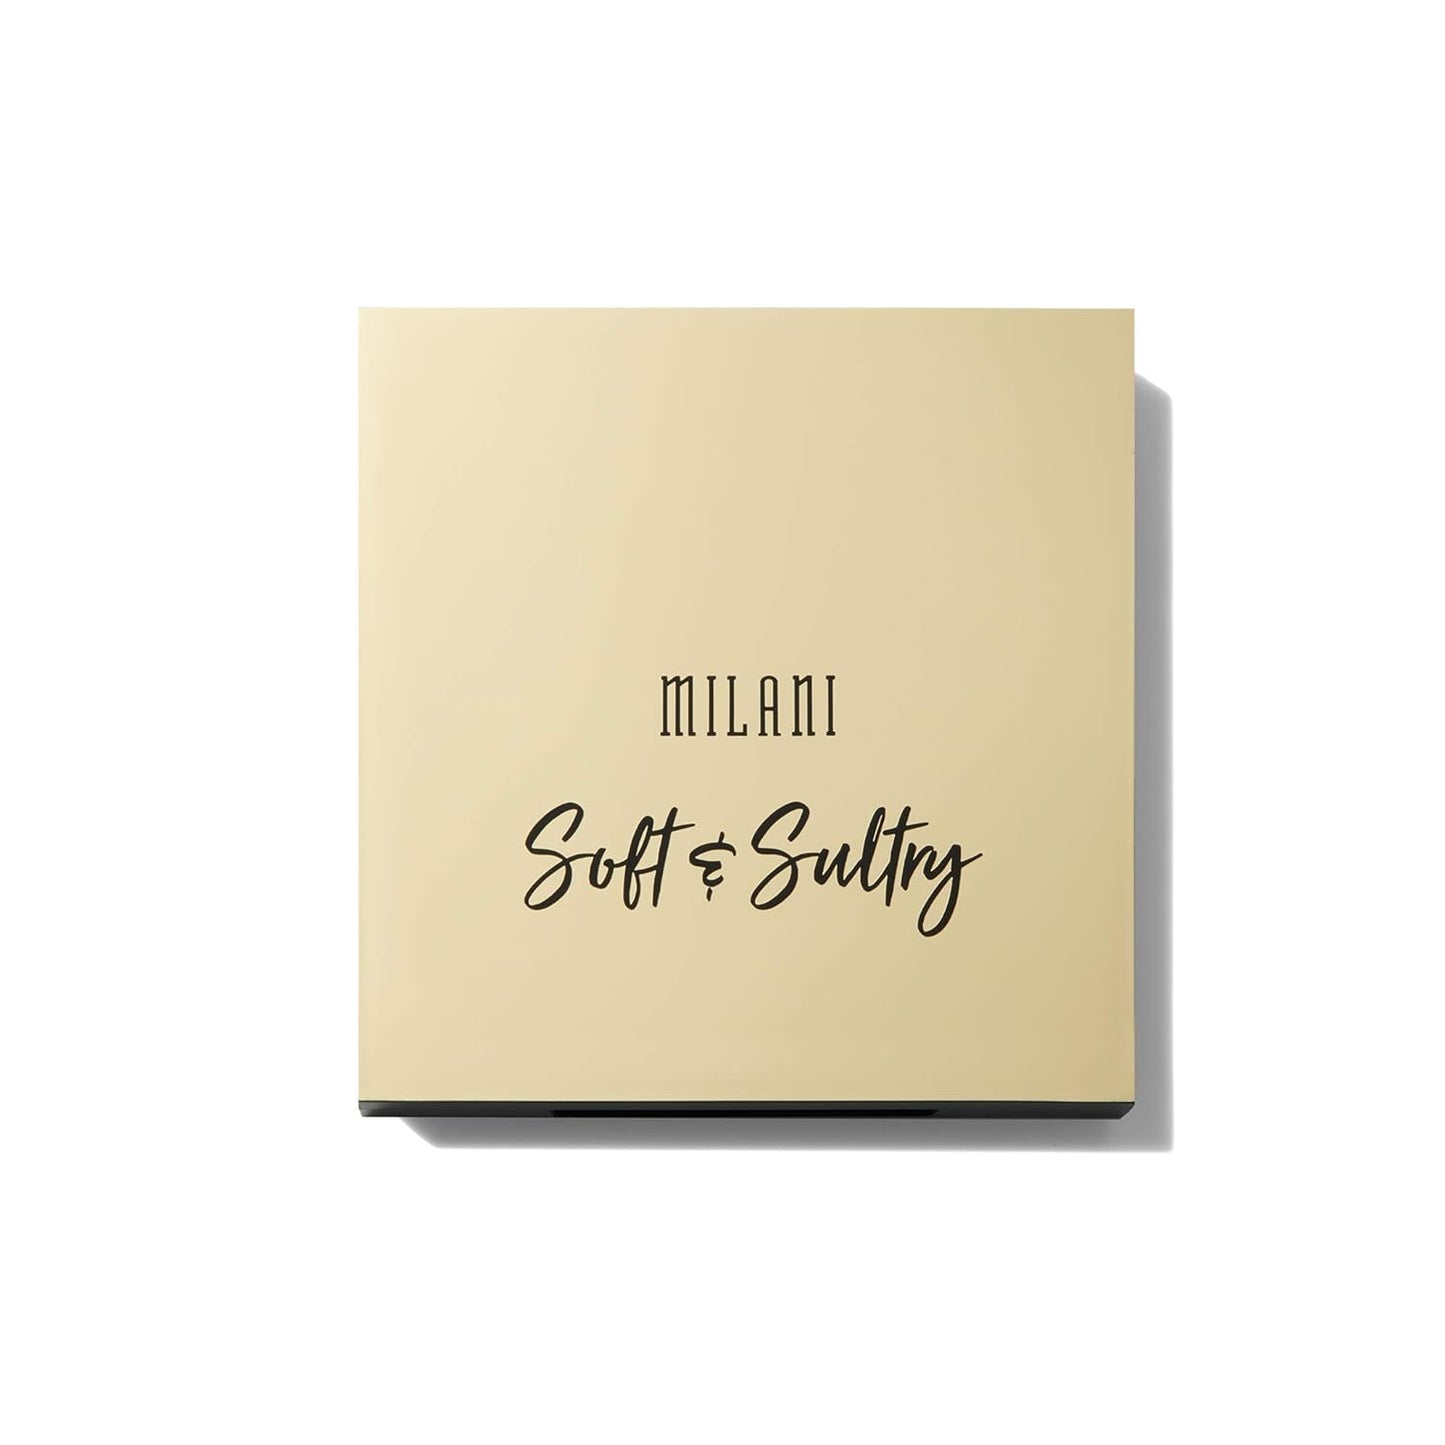 Milani Soft & Sultry Eyeshadow Palette (0.48 Ounce) 12 Cruelty-Free Smoky Matte & Metallic Eyeshadow Colors for Long-Lasting Wear